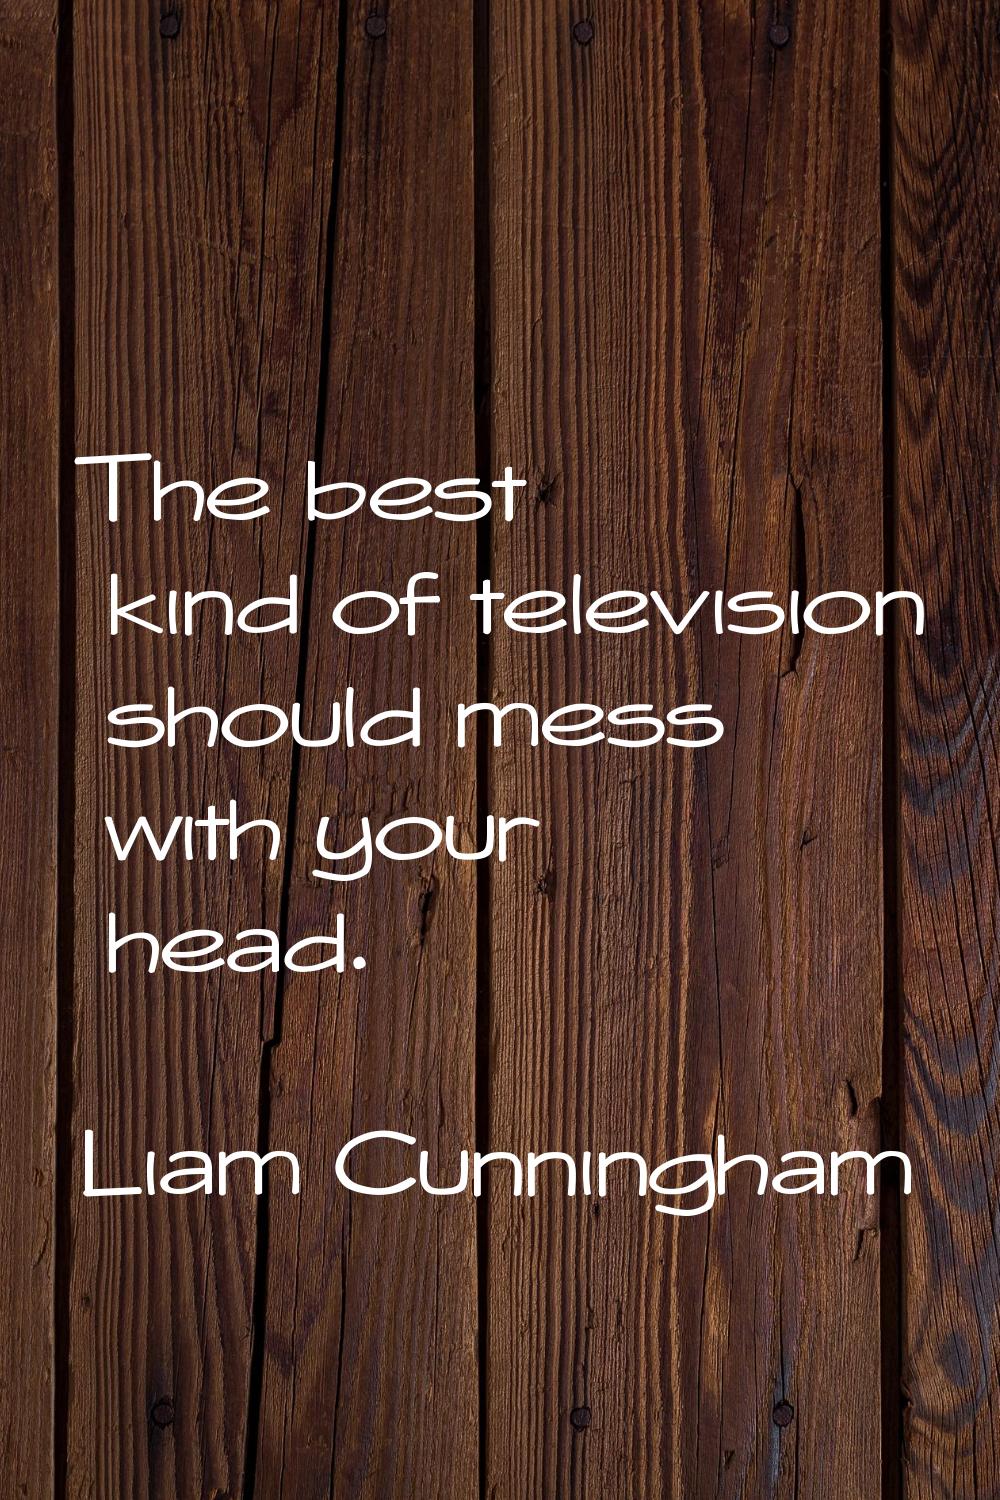 The best kind of television should mess with your head.